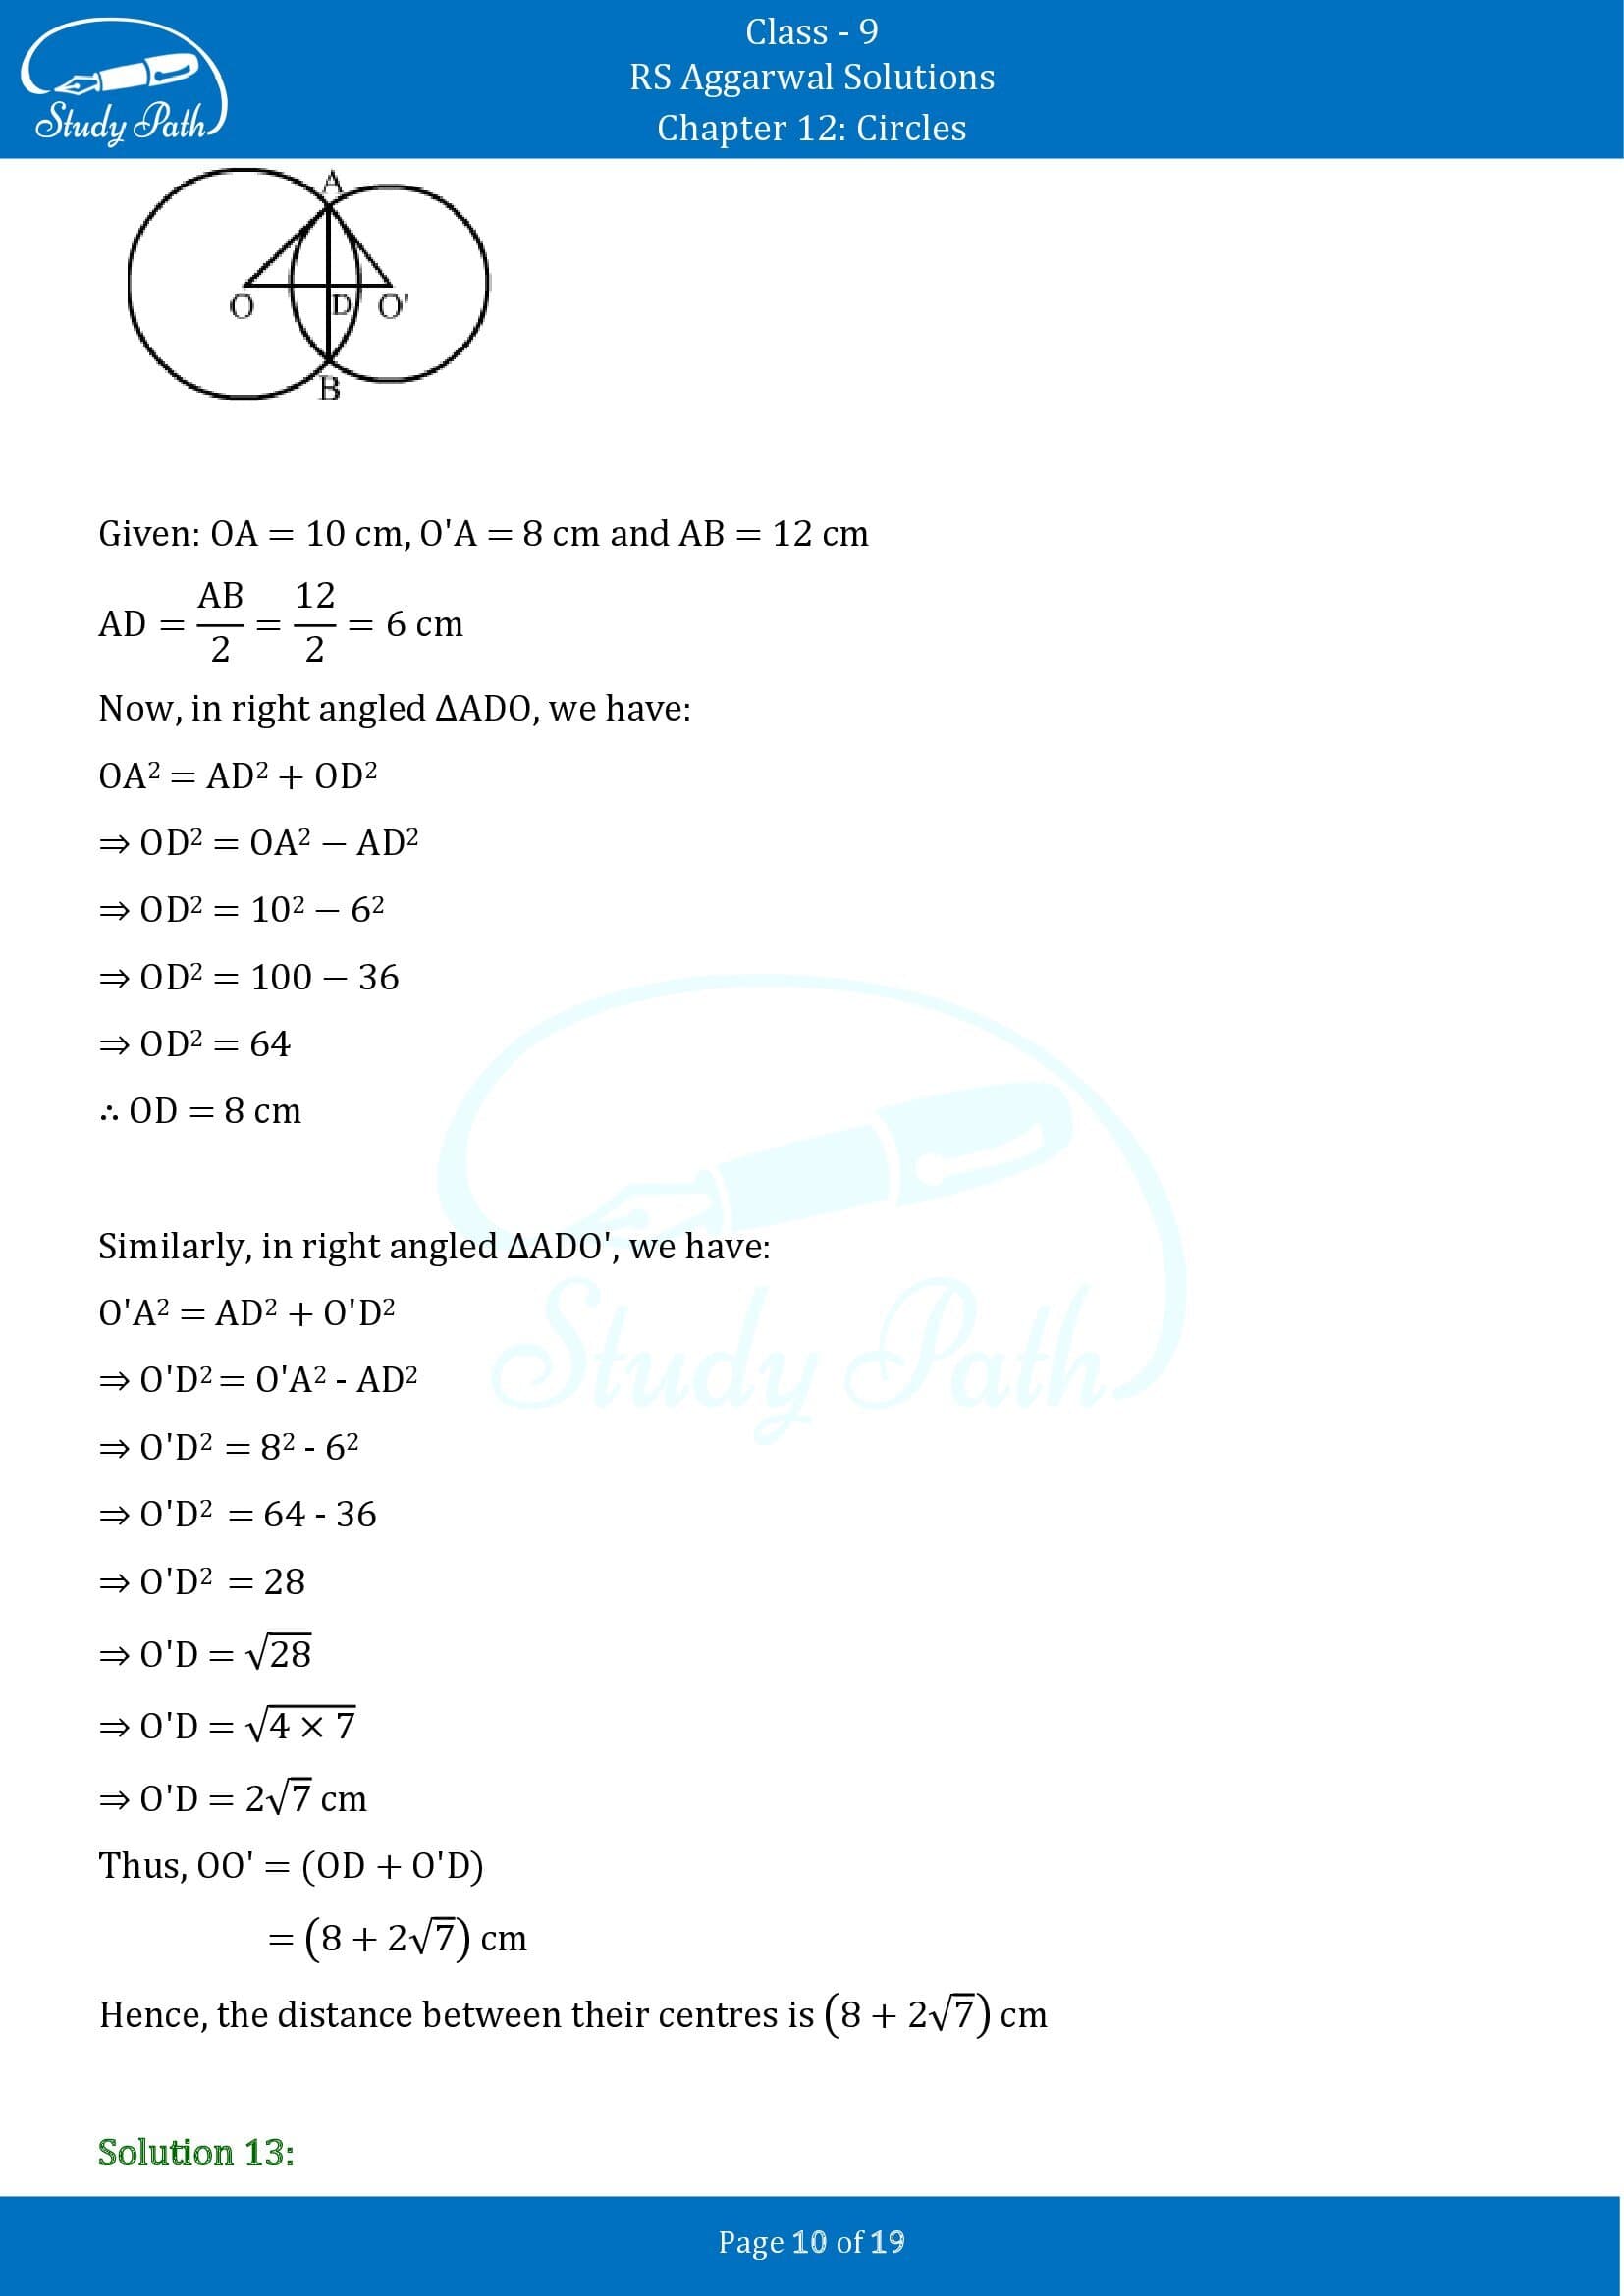 RS Aggarwal Solutions Class 9 Chapter 12 Circles Exercise 12A 00010